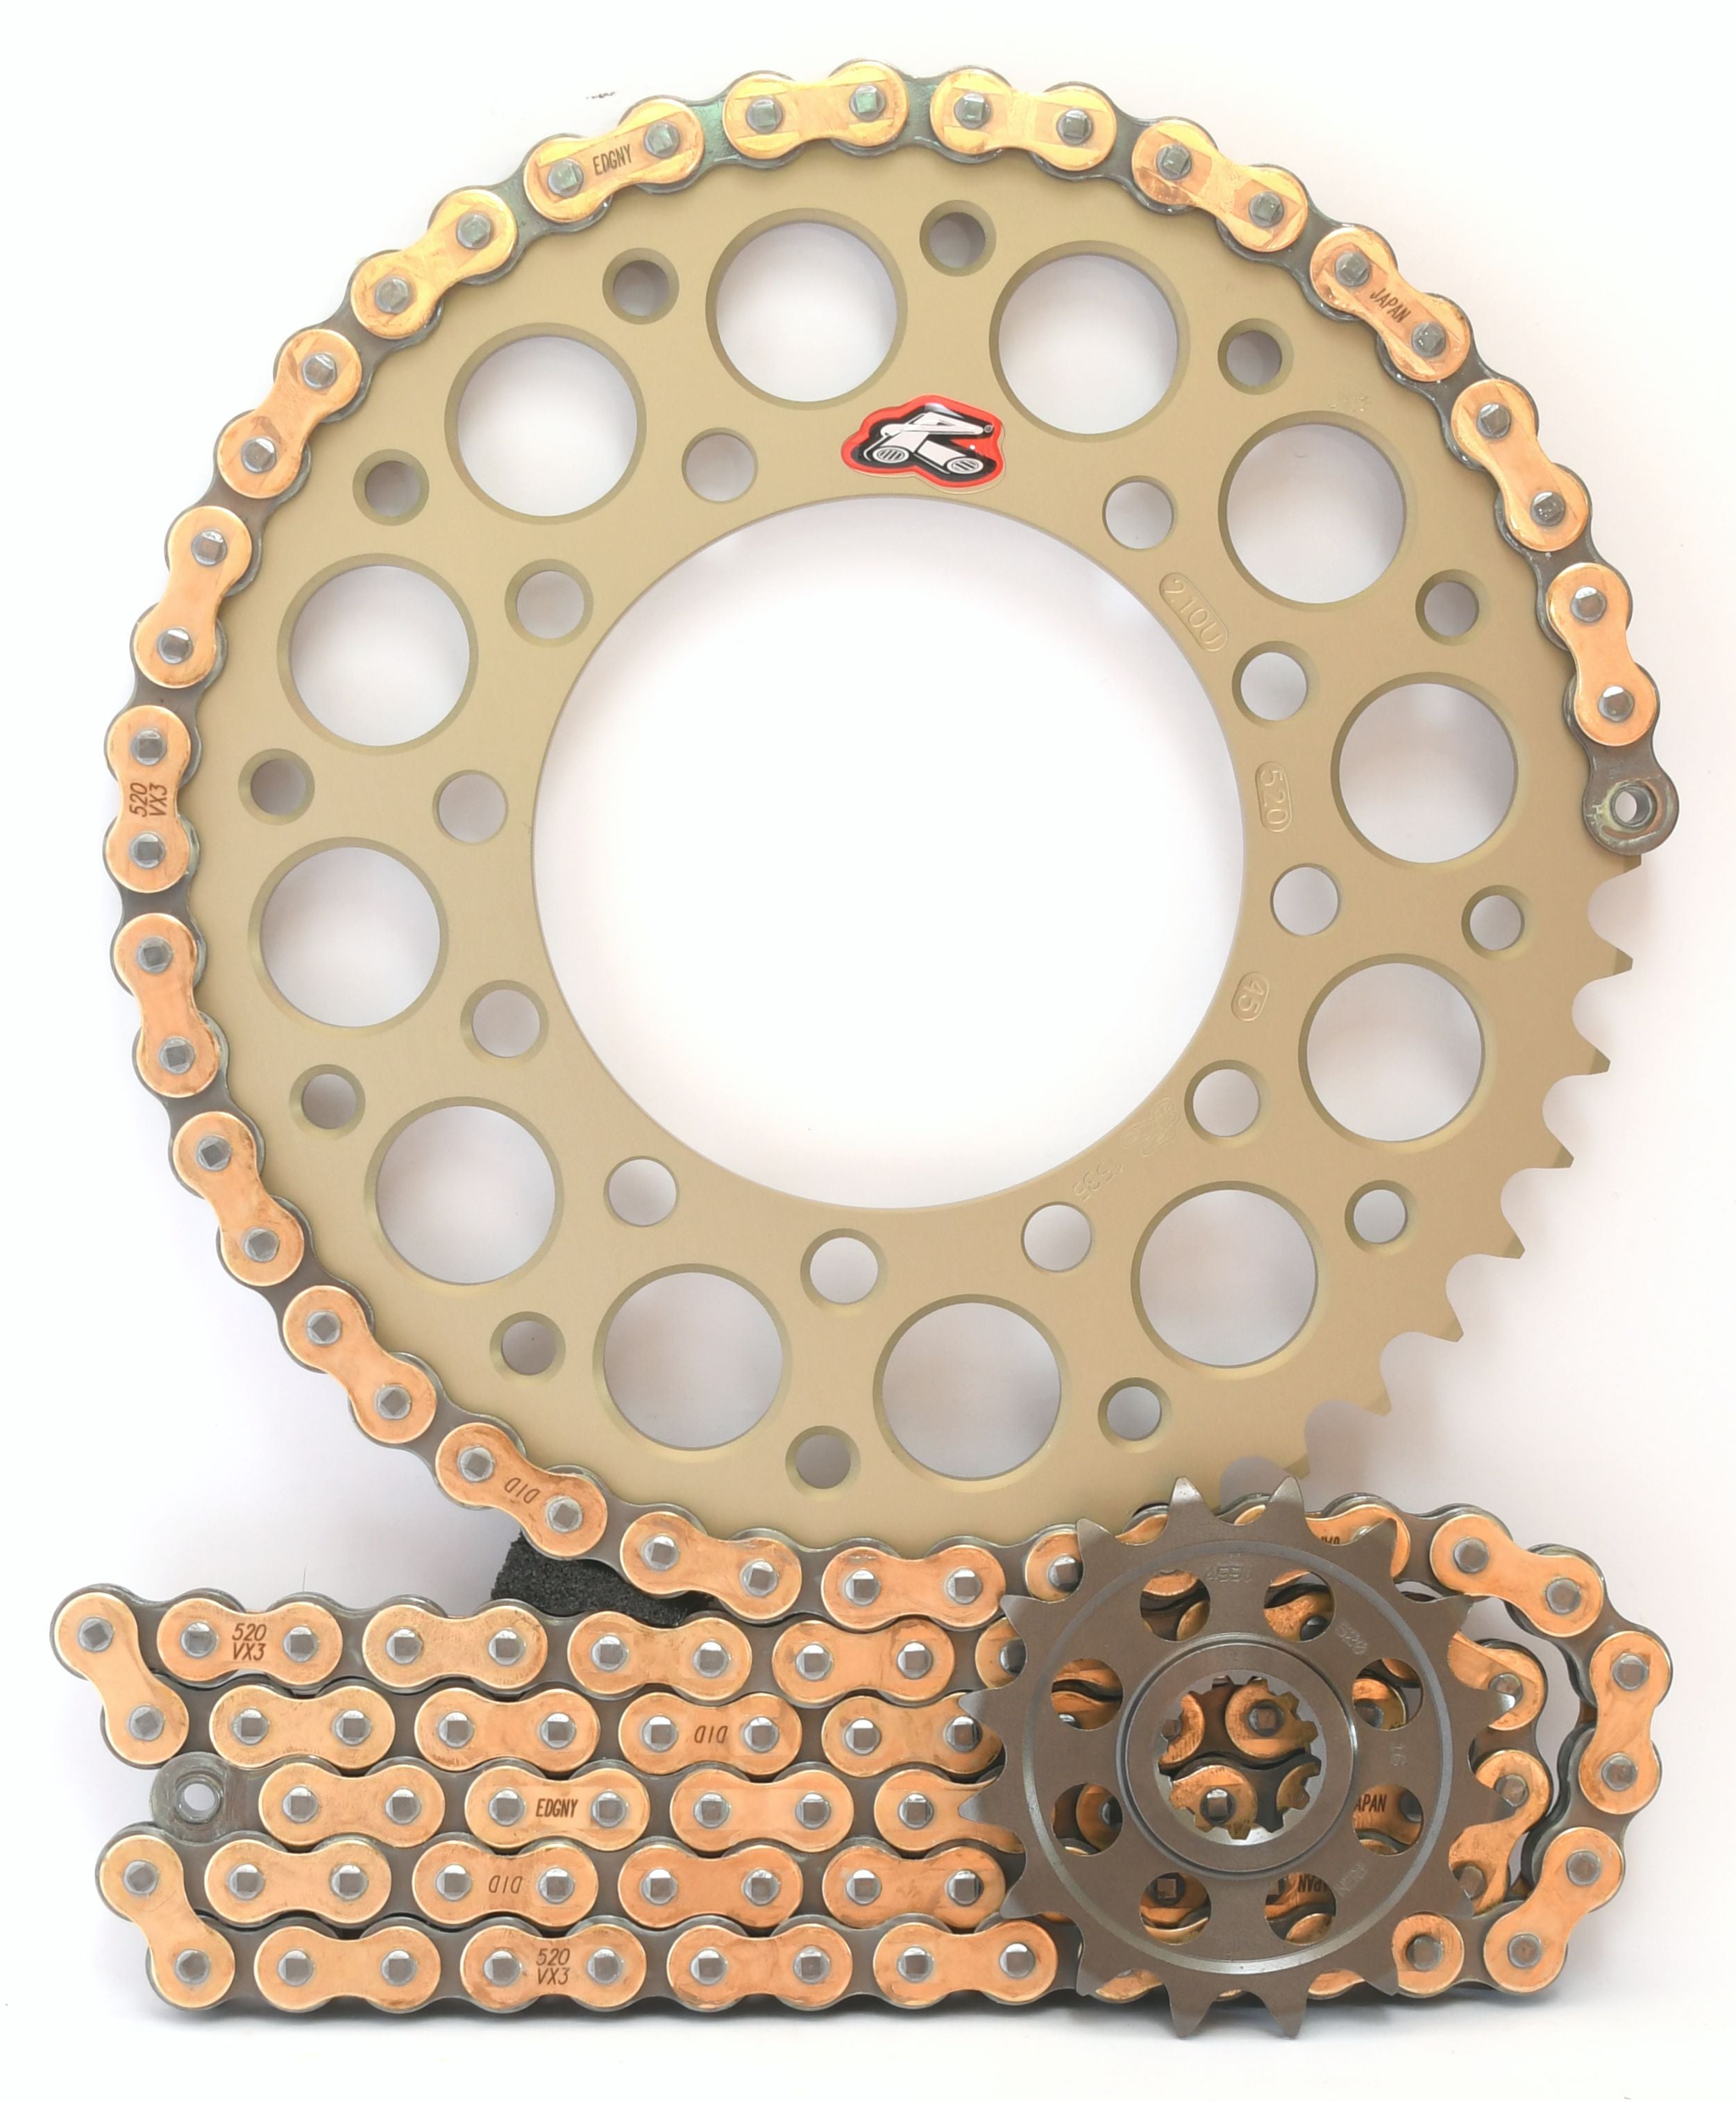 Renthal Ultralight and DID 520 Conversion Chain & Sprocket Kit for Honda CBR1000RR Fireblade SP 2017-2019 - Standard Gearing